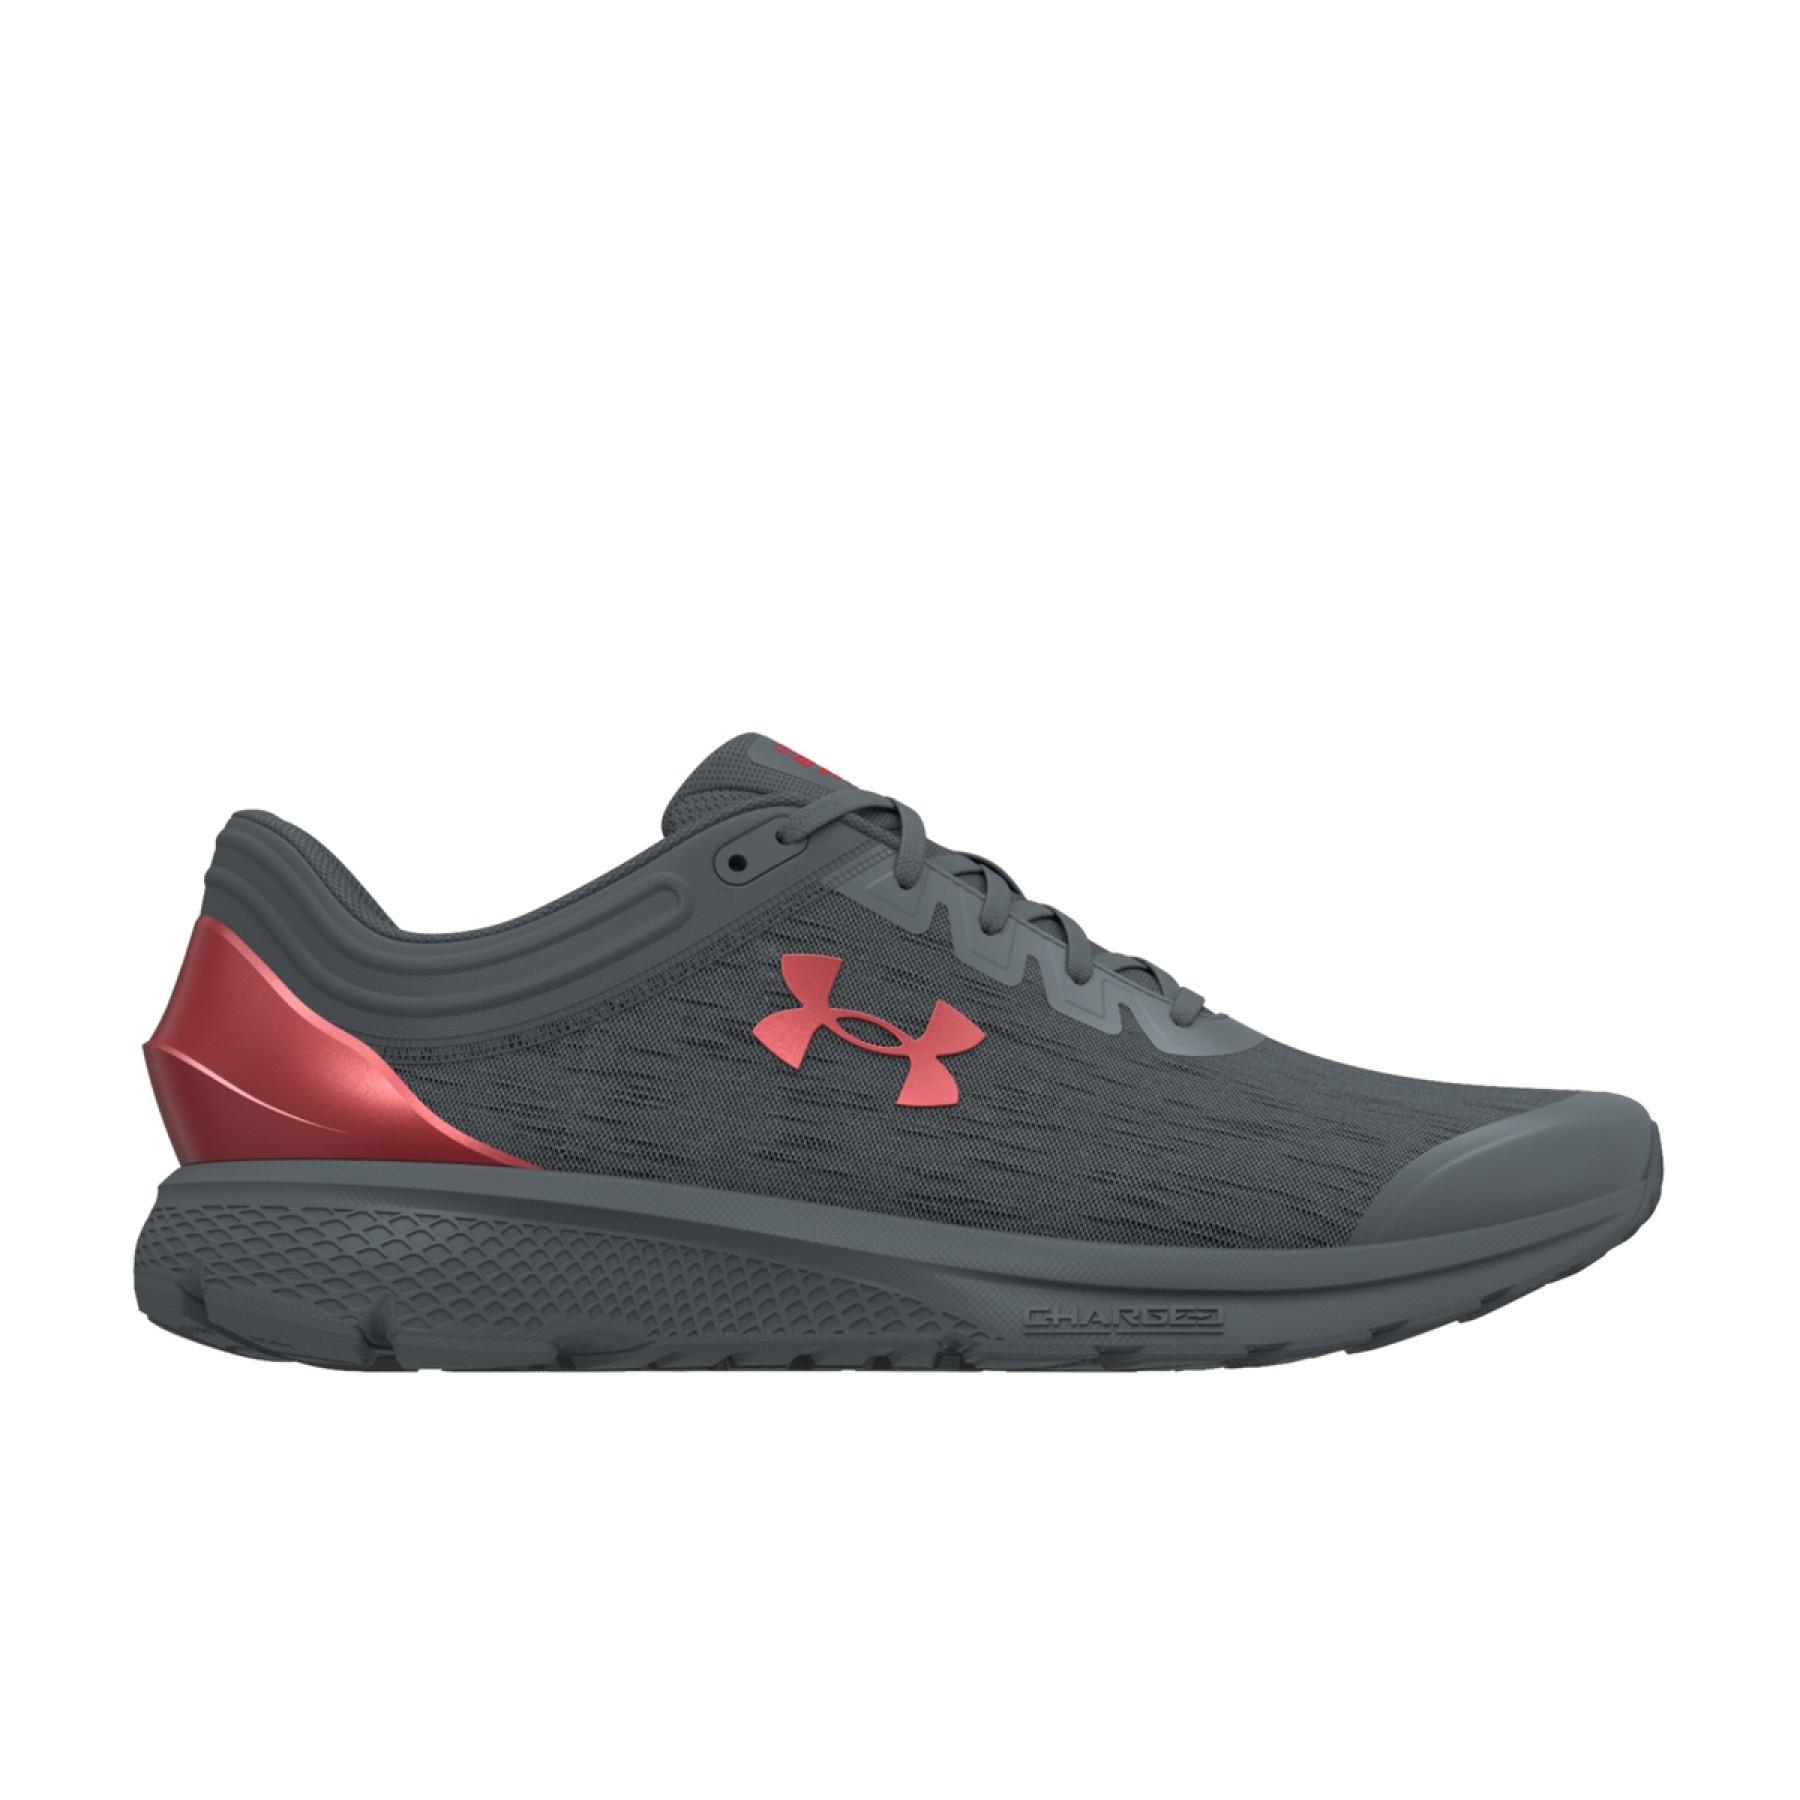 Chaussures de running Under Armour Charged Escape 3 Evo Charm